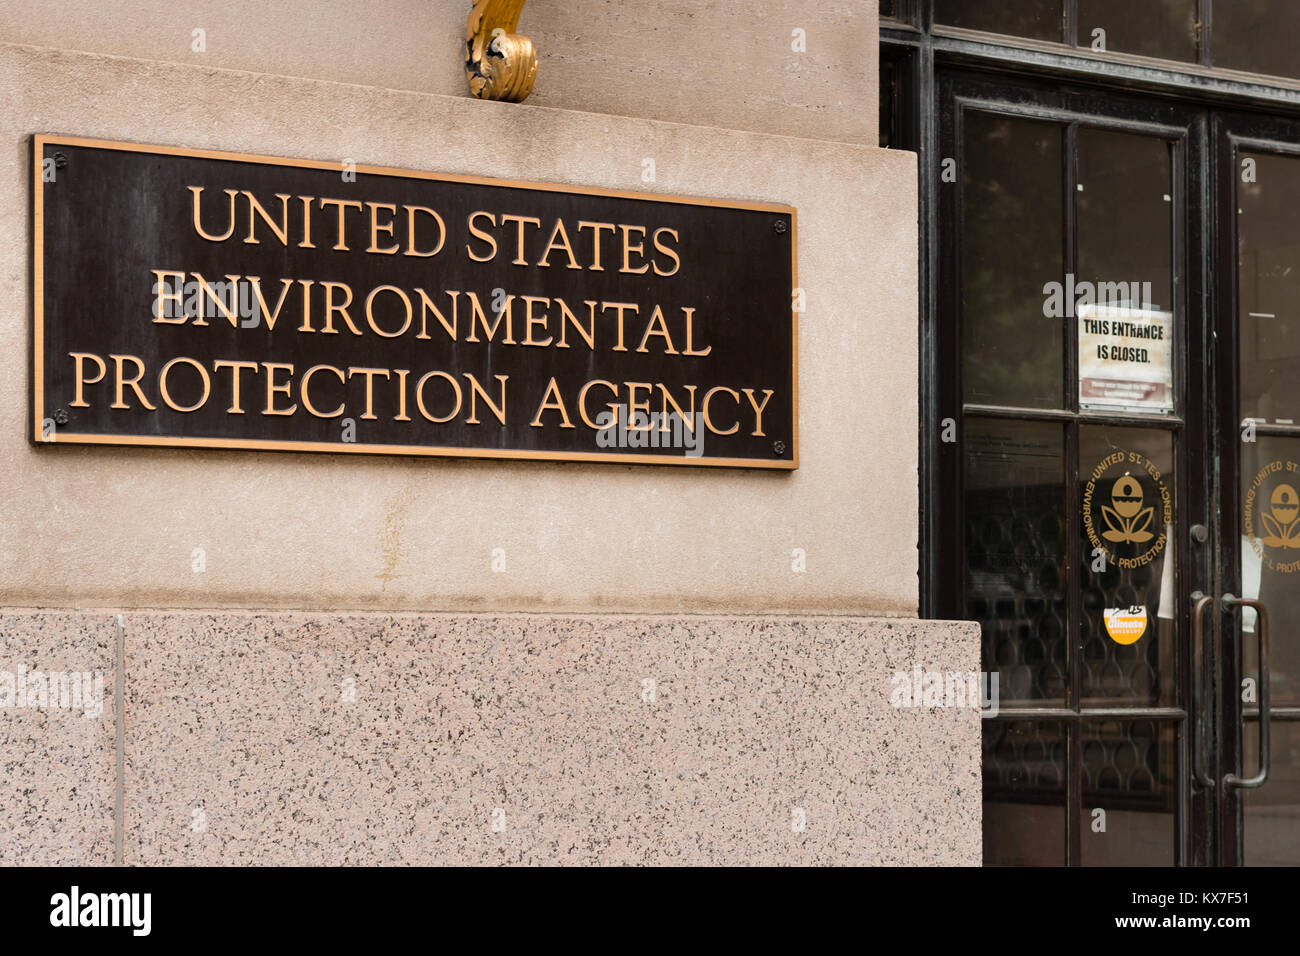 United States Environmental Protection Agency sign with closed entrance Stock Photo